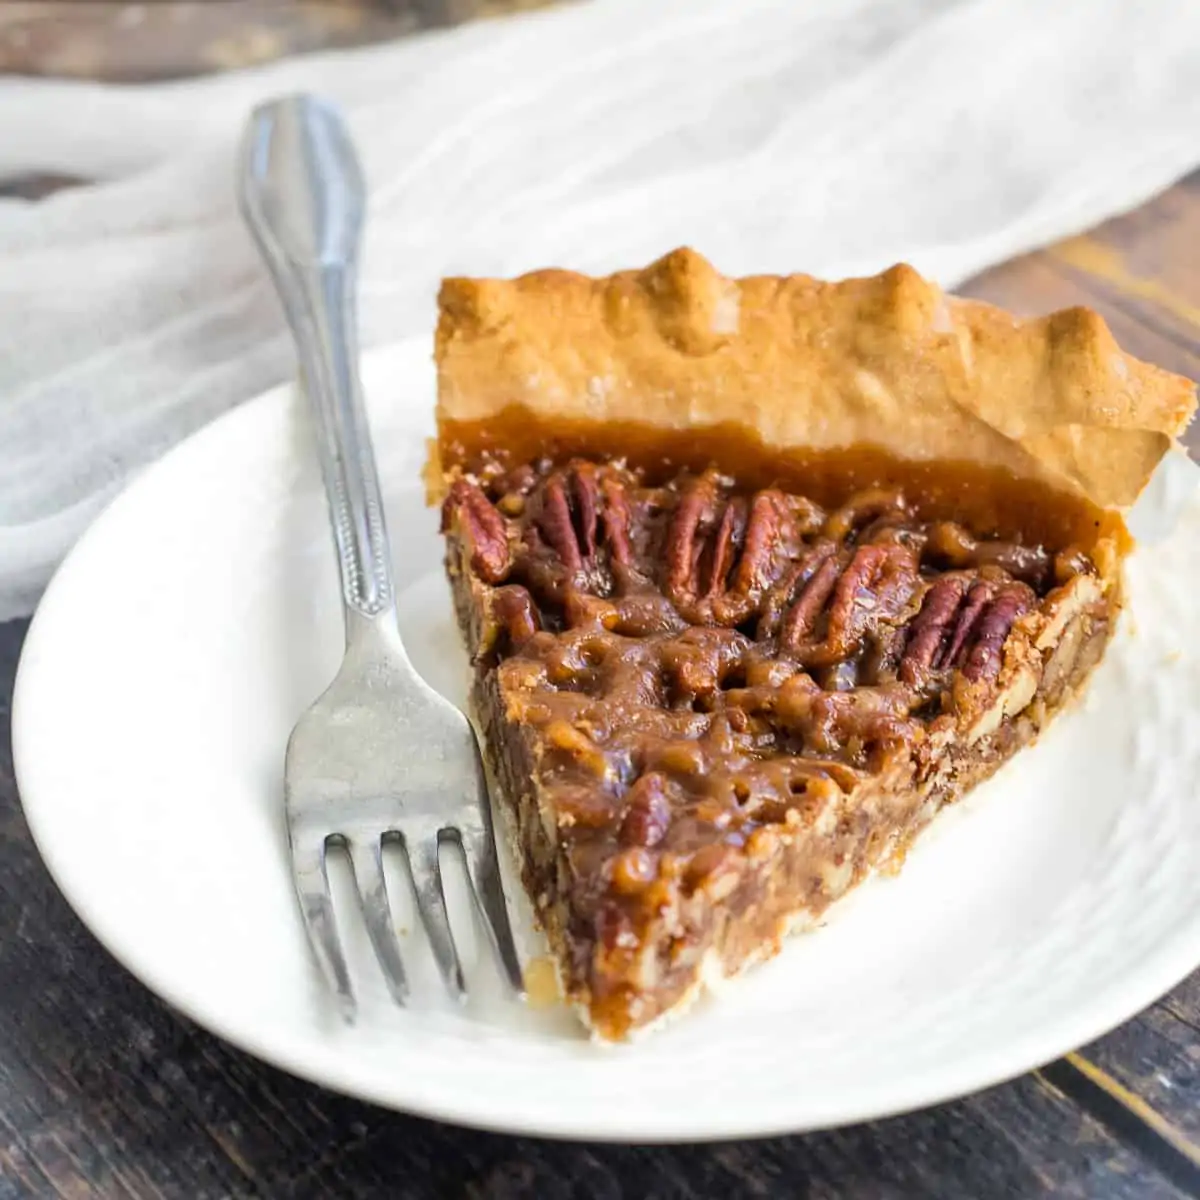 Slice of pecan pie on white plate with fork.